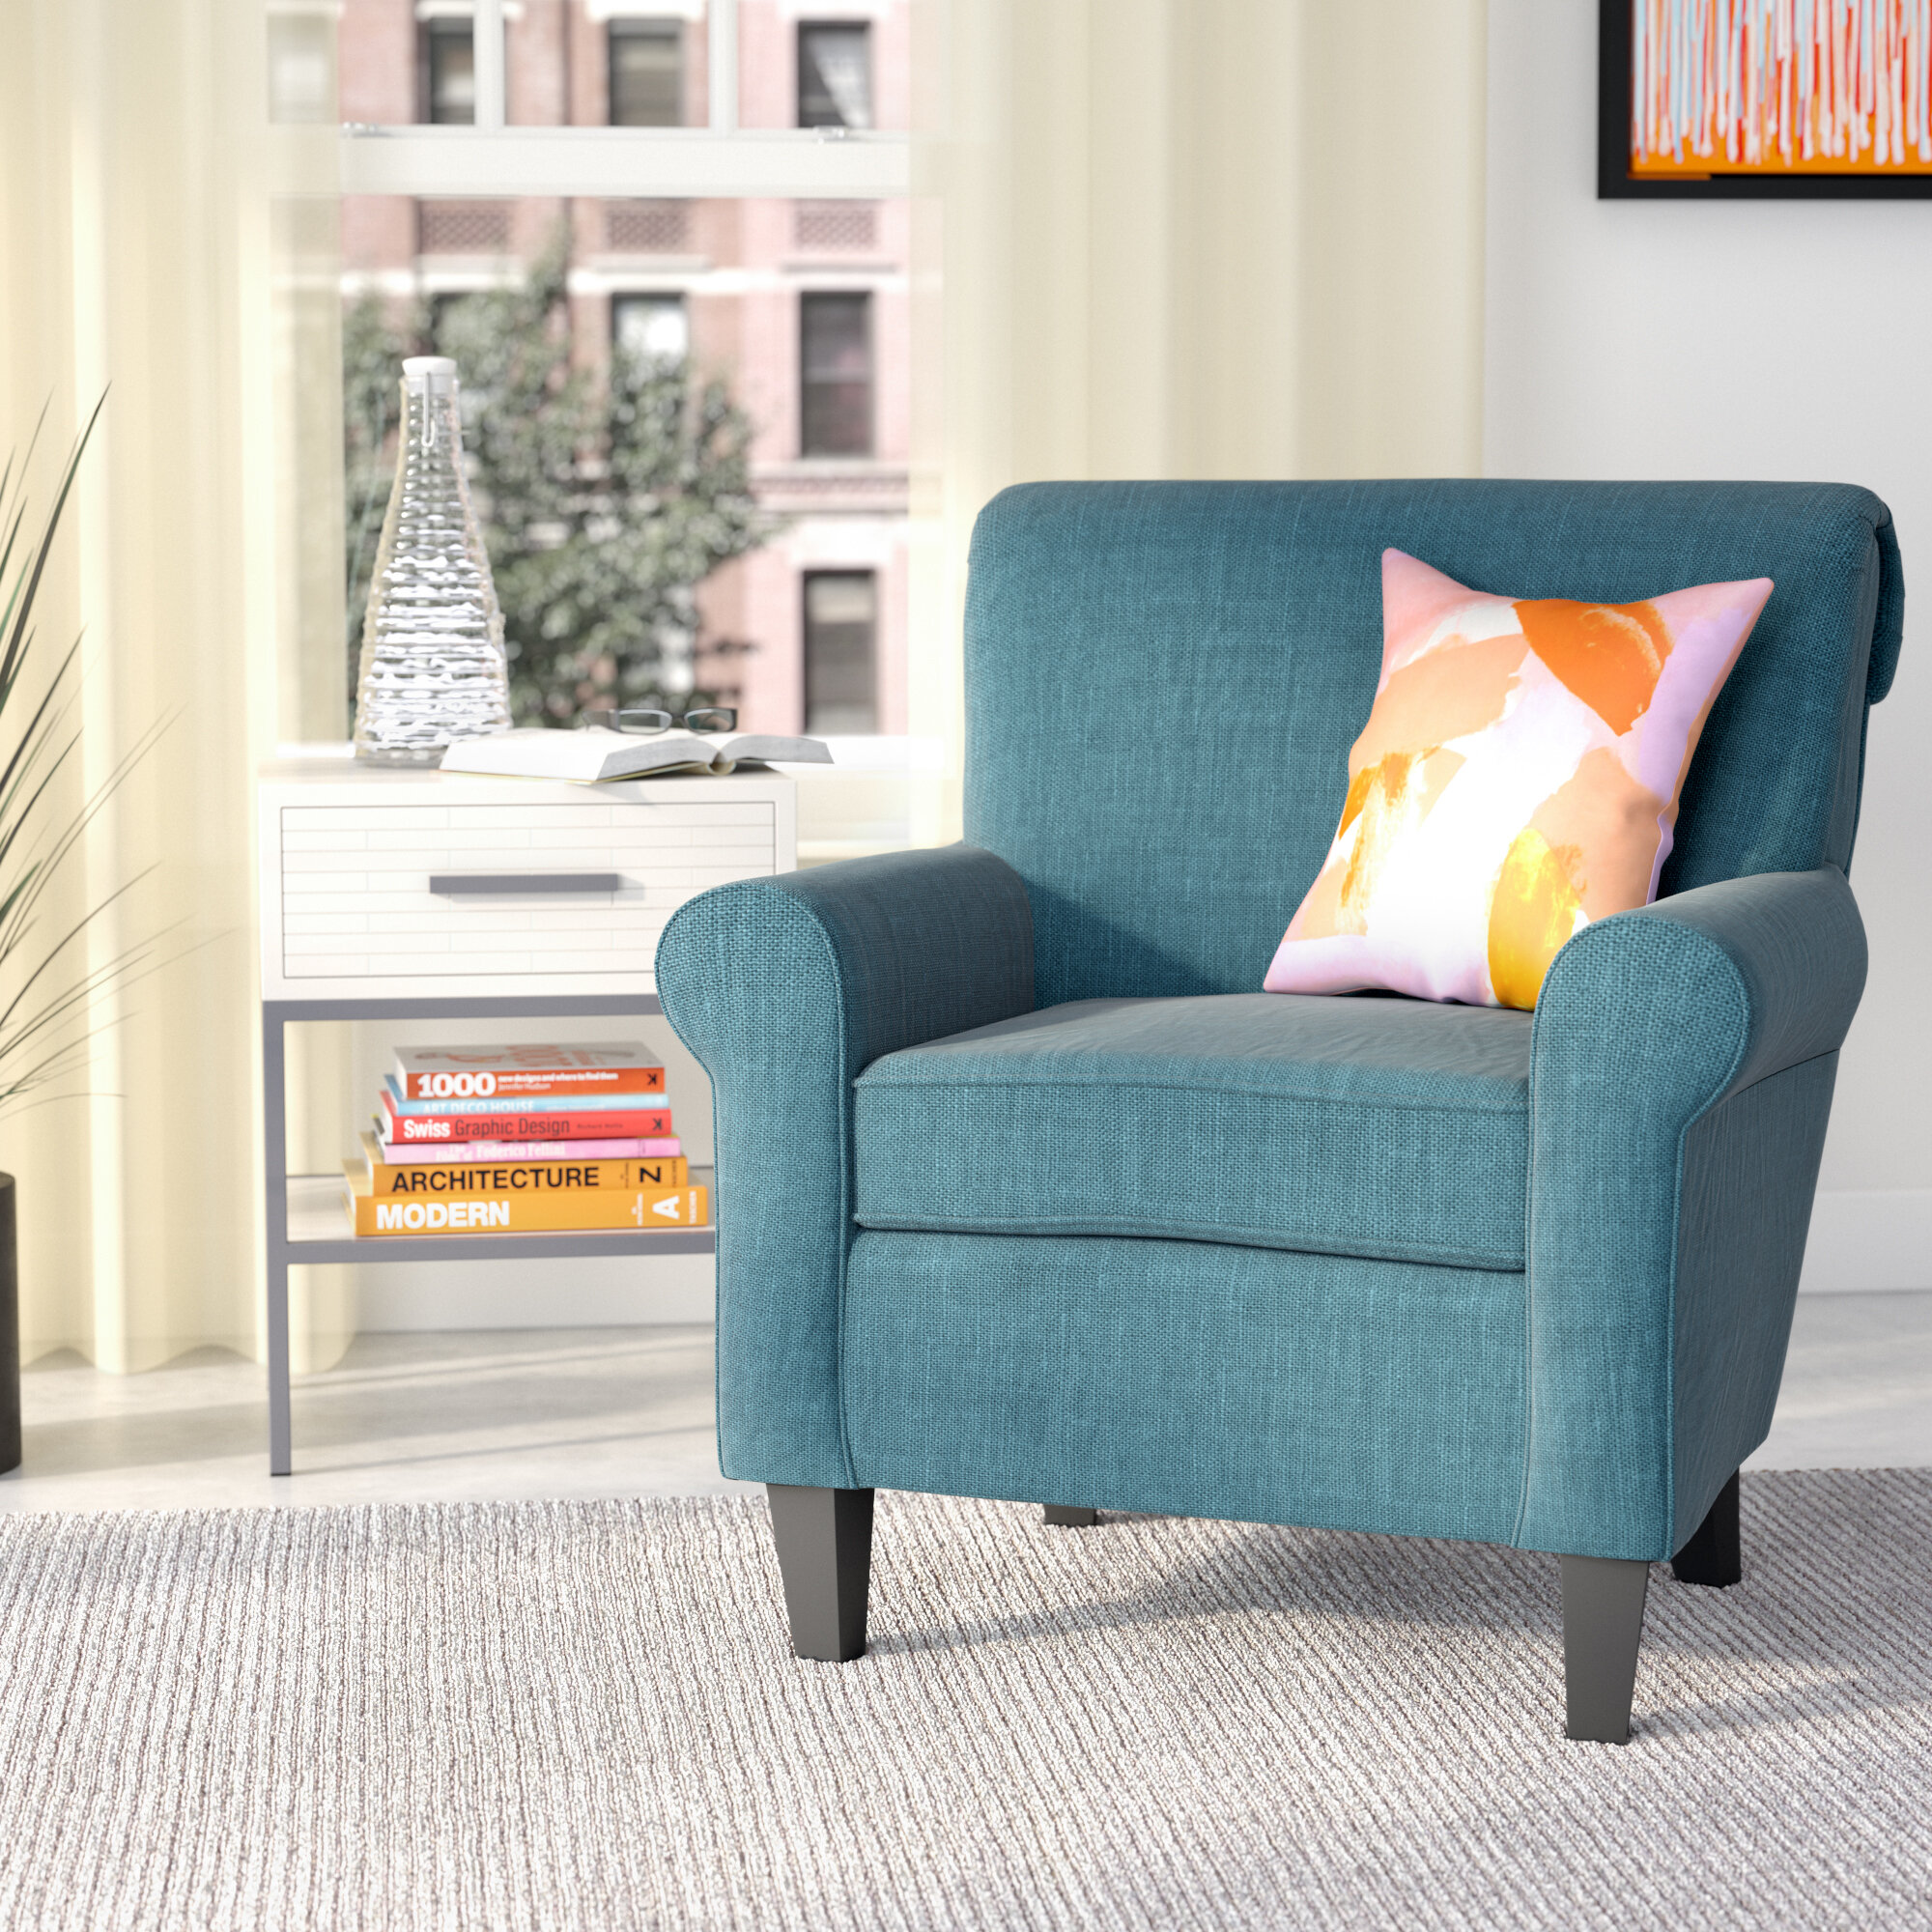 teal and brown chair